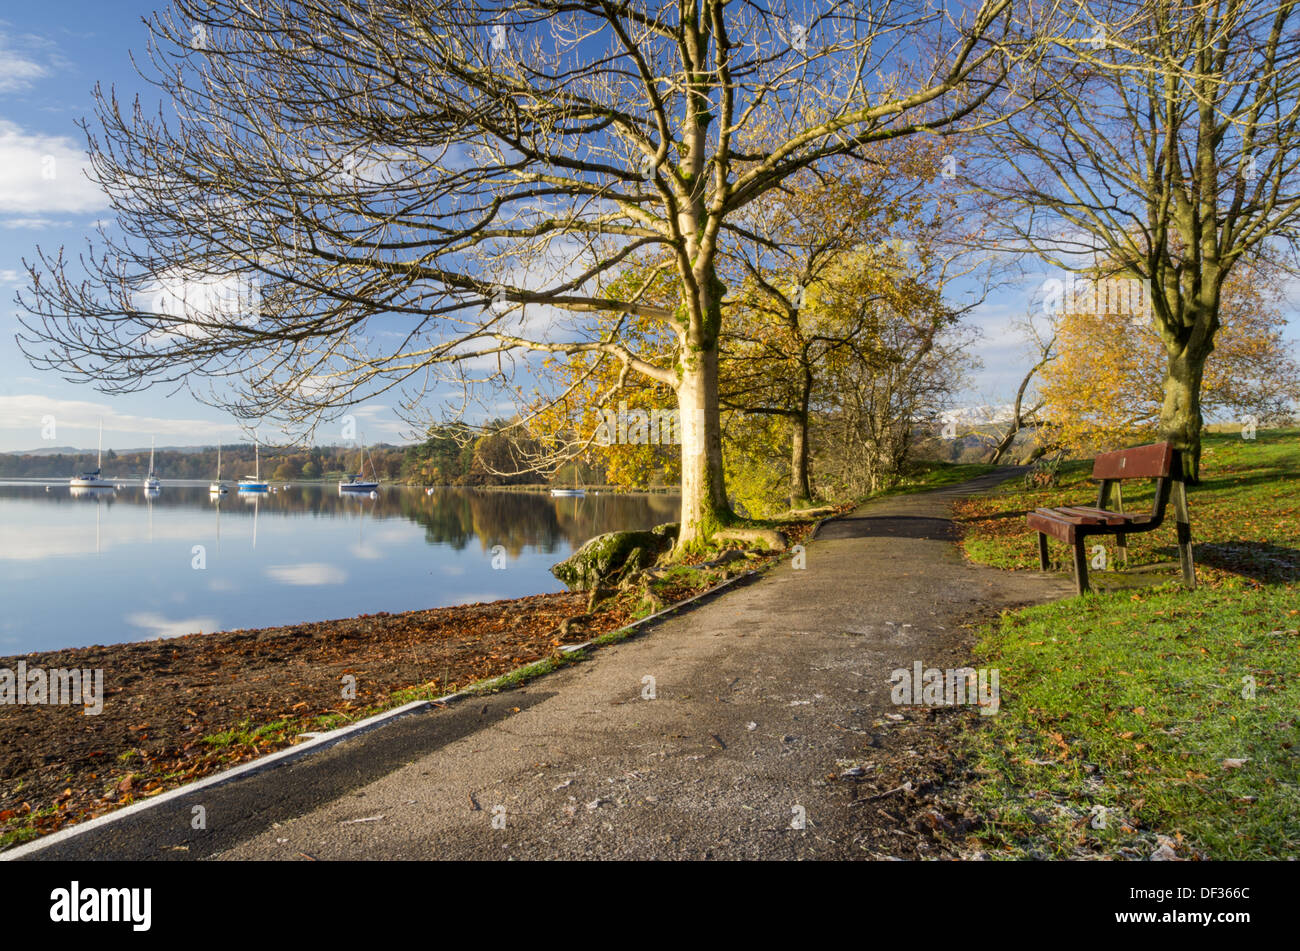 A serene scene of a bench in a lake-side park near Ambleside on a sunny morning with mirror-like water and yachts. Stock Photo